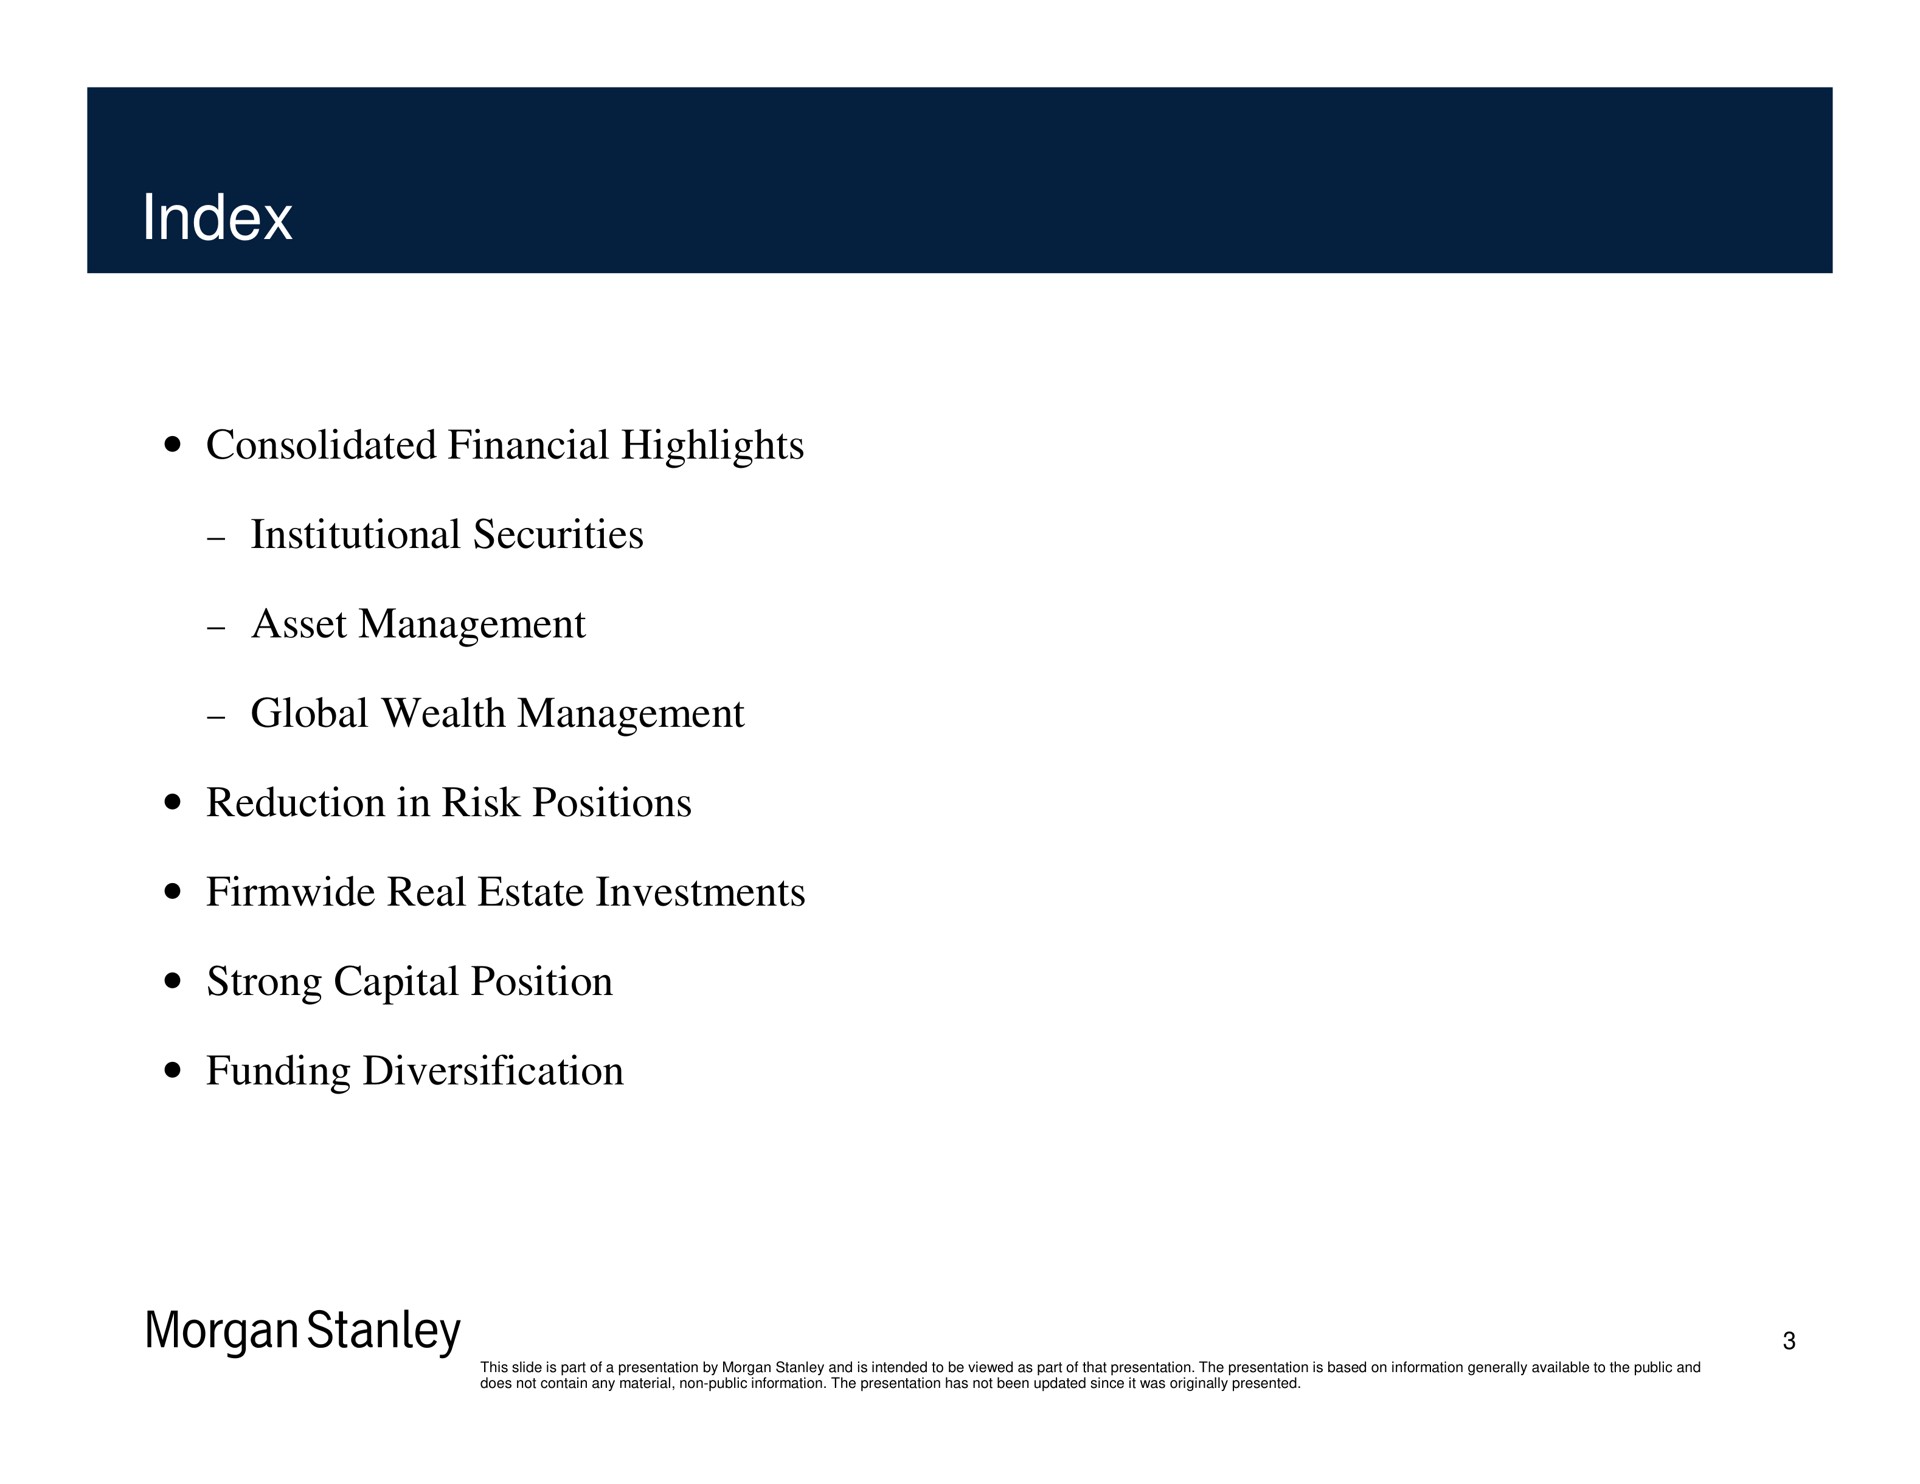 index consolidated financial highlights institutional securities asset management global wealth management reduction in risk positions real estate investments strong capital position funding diversification morgan | Morgan Stanley